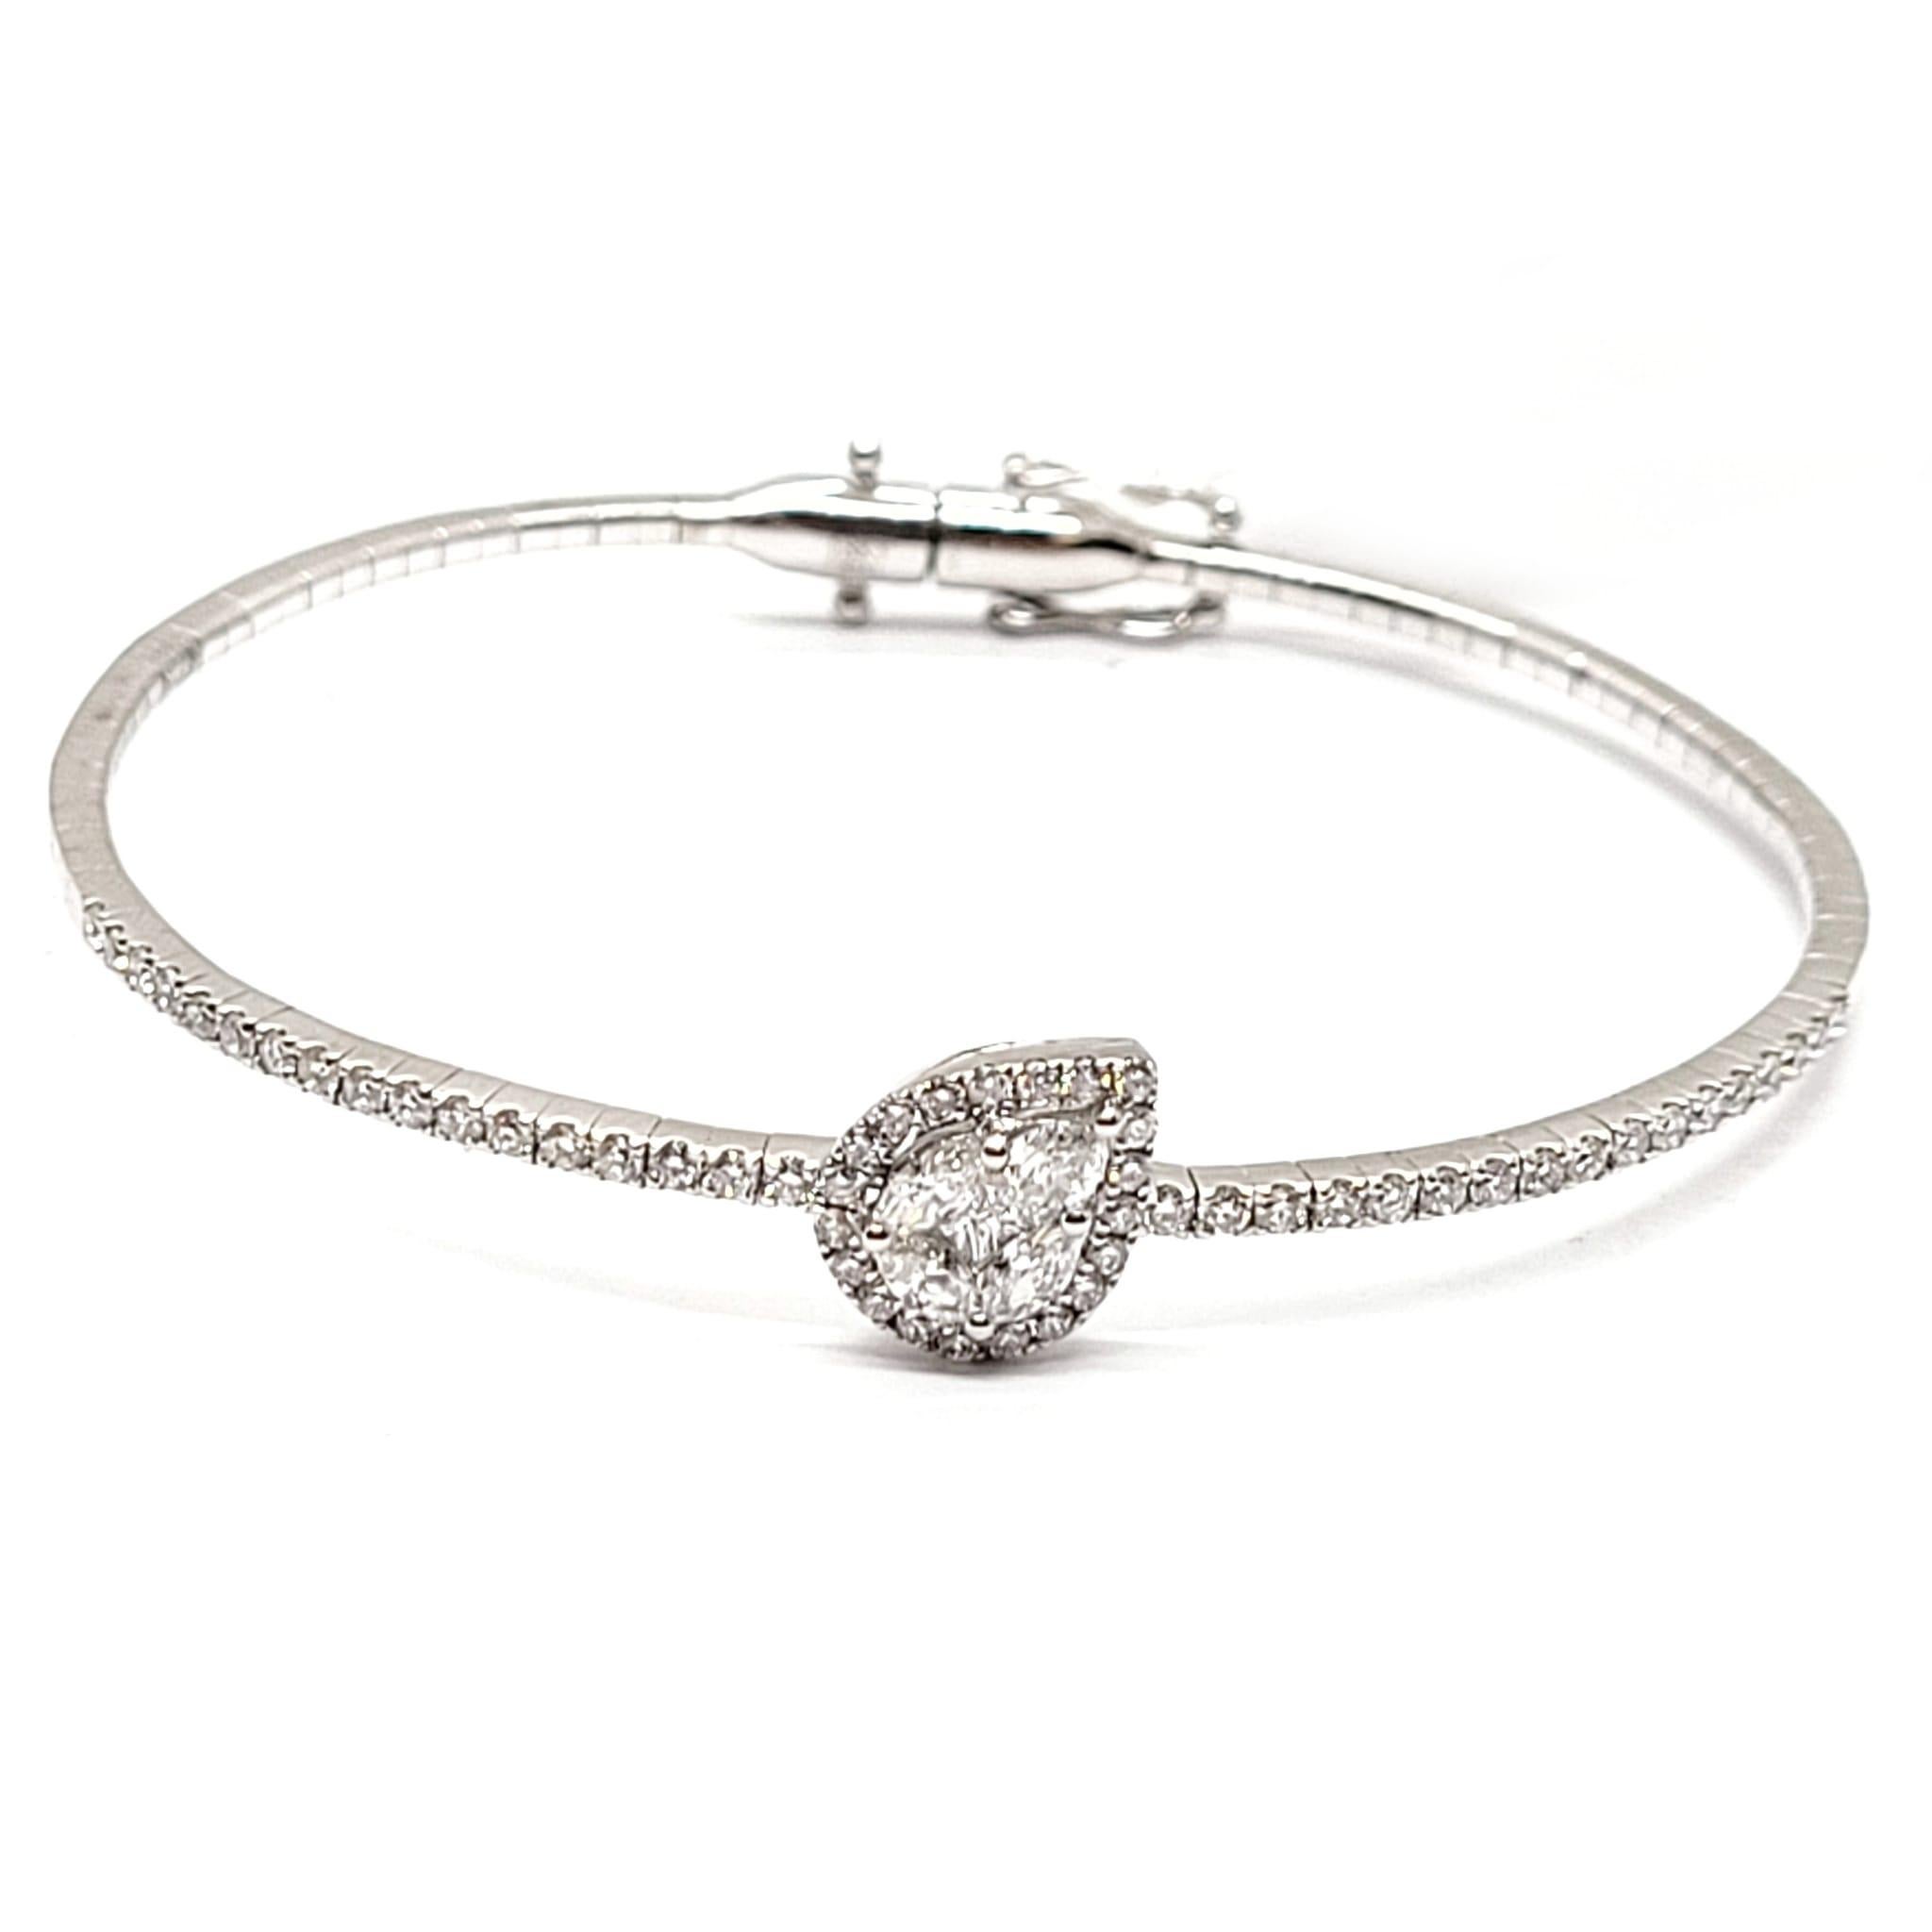 Andreoli Pear Shaped Invisible Diamond 18 Karat Gold Bangle Bracelet

This bracelet features:
- 1.10 Carat Diamond
- 8.54 g 18kt White Gold
- Made In Italy